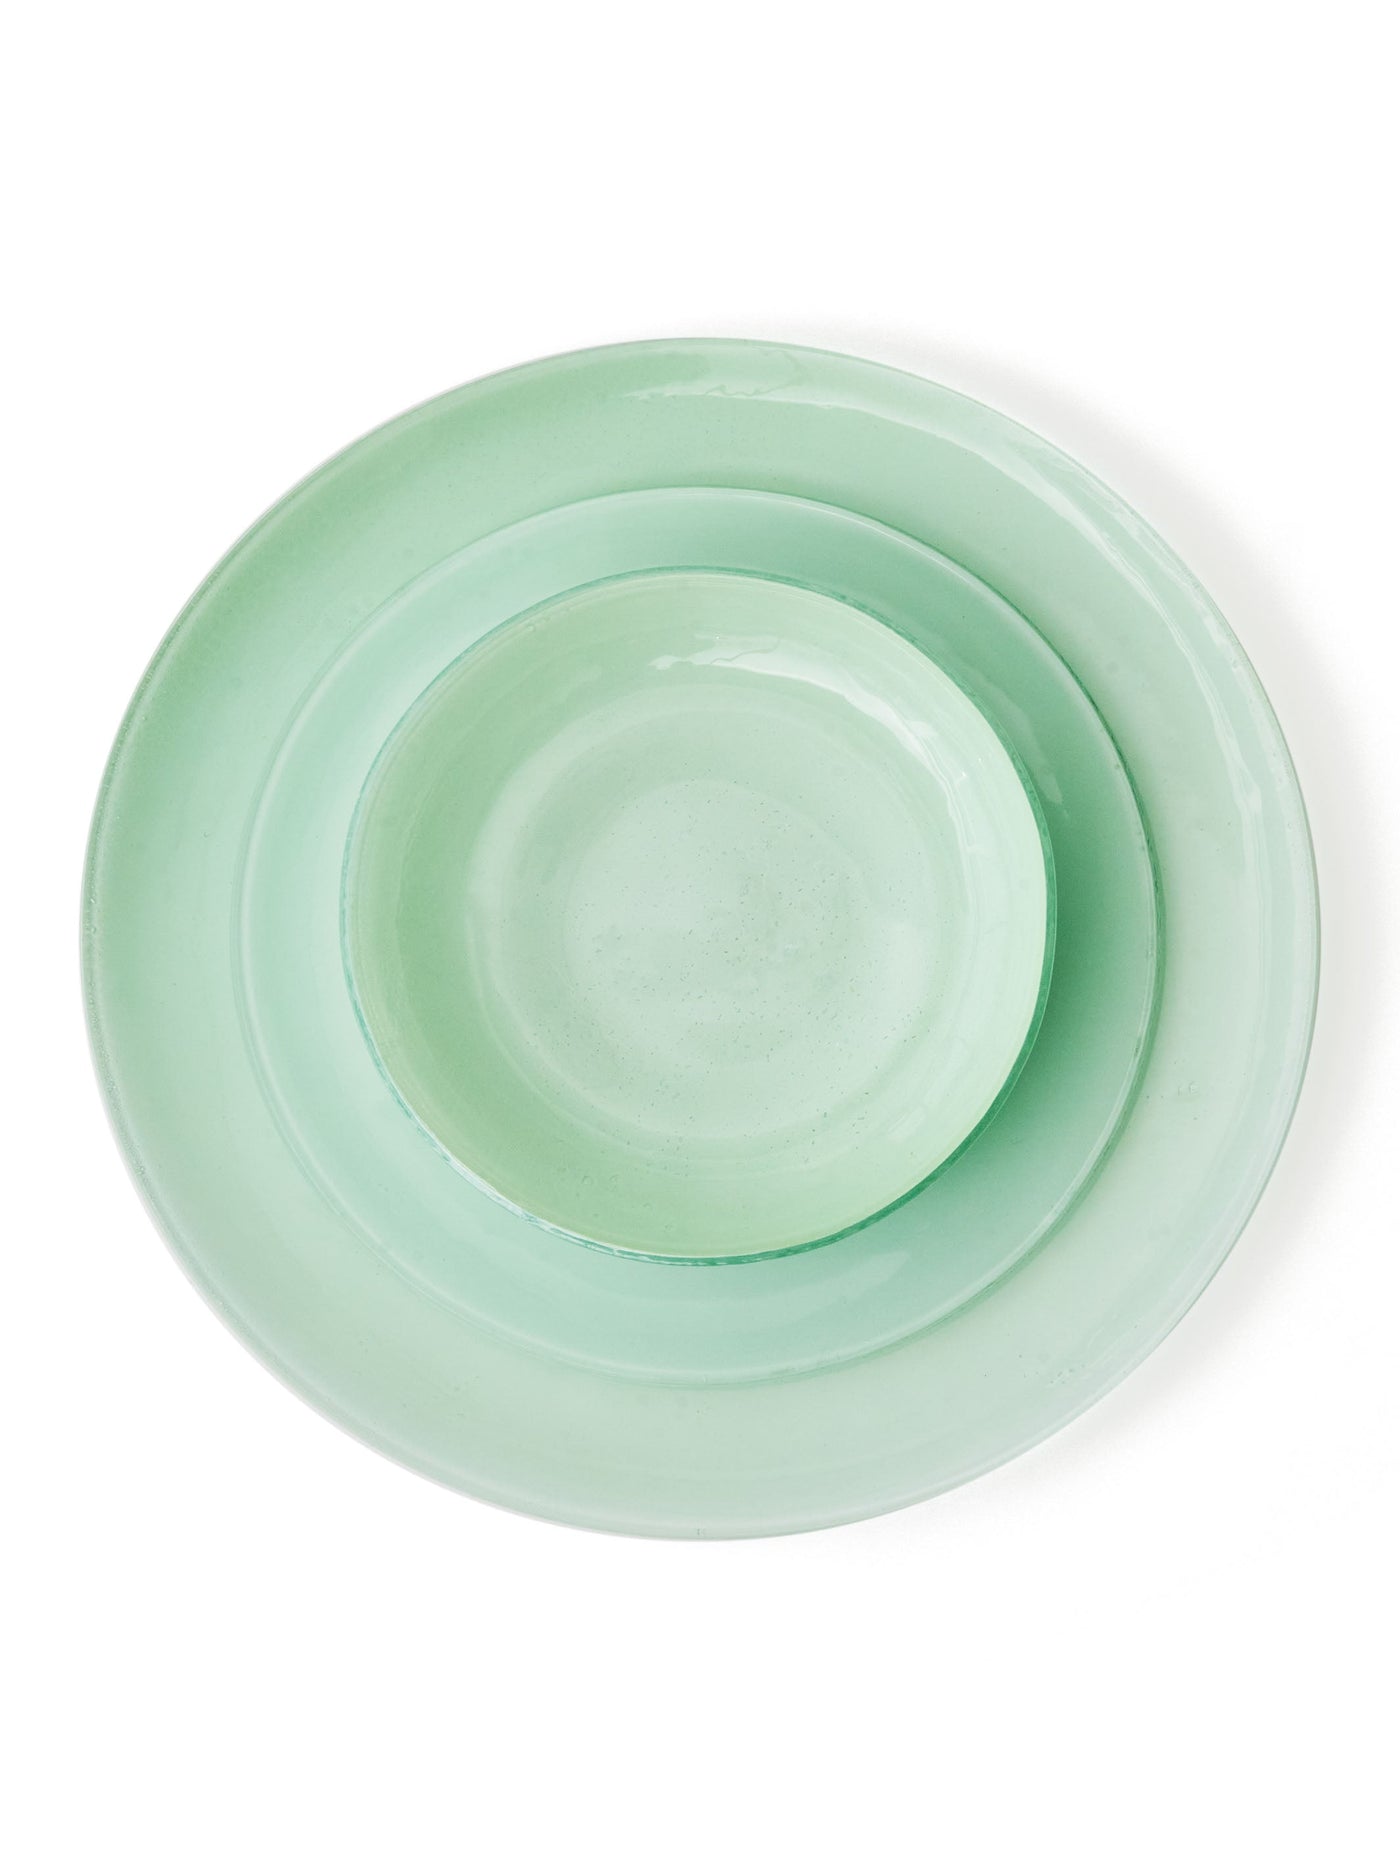 Handmade Glass Dinnerware in Mint by Caju Collective